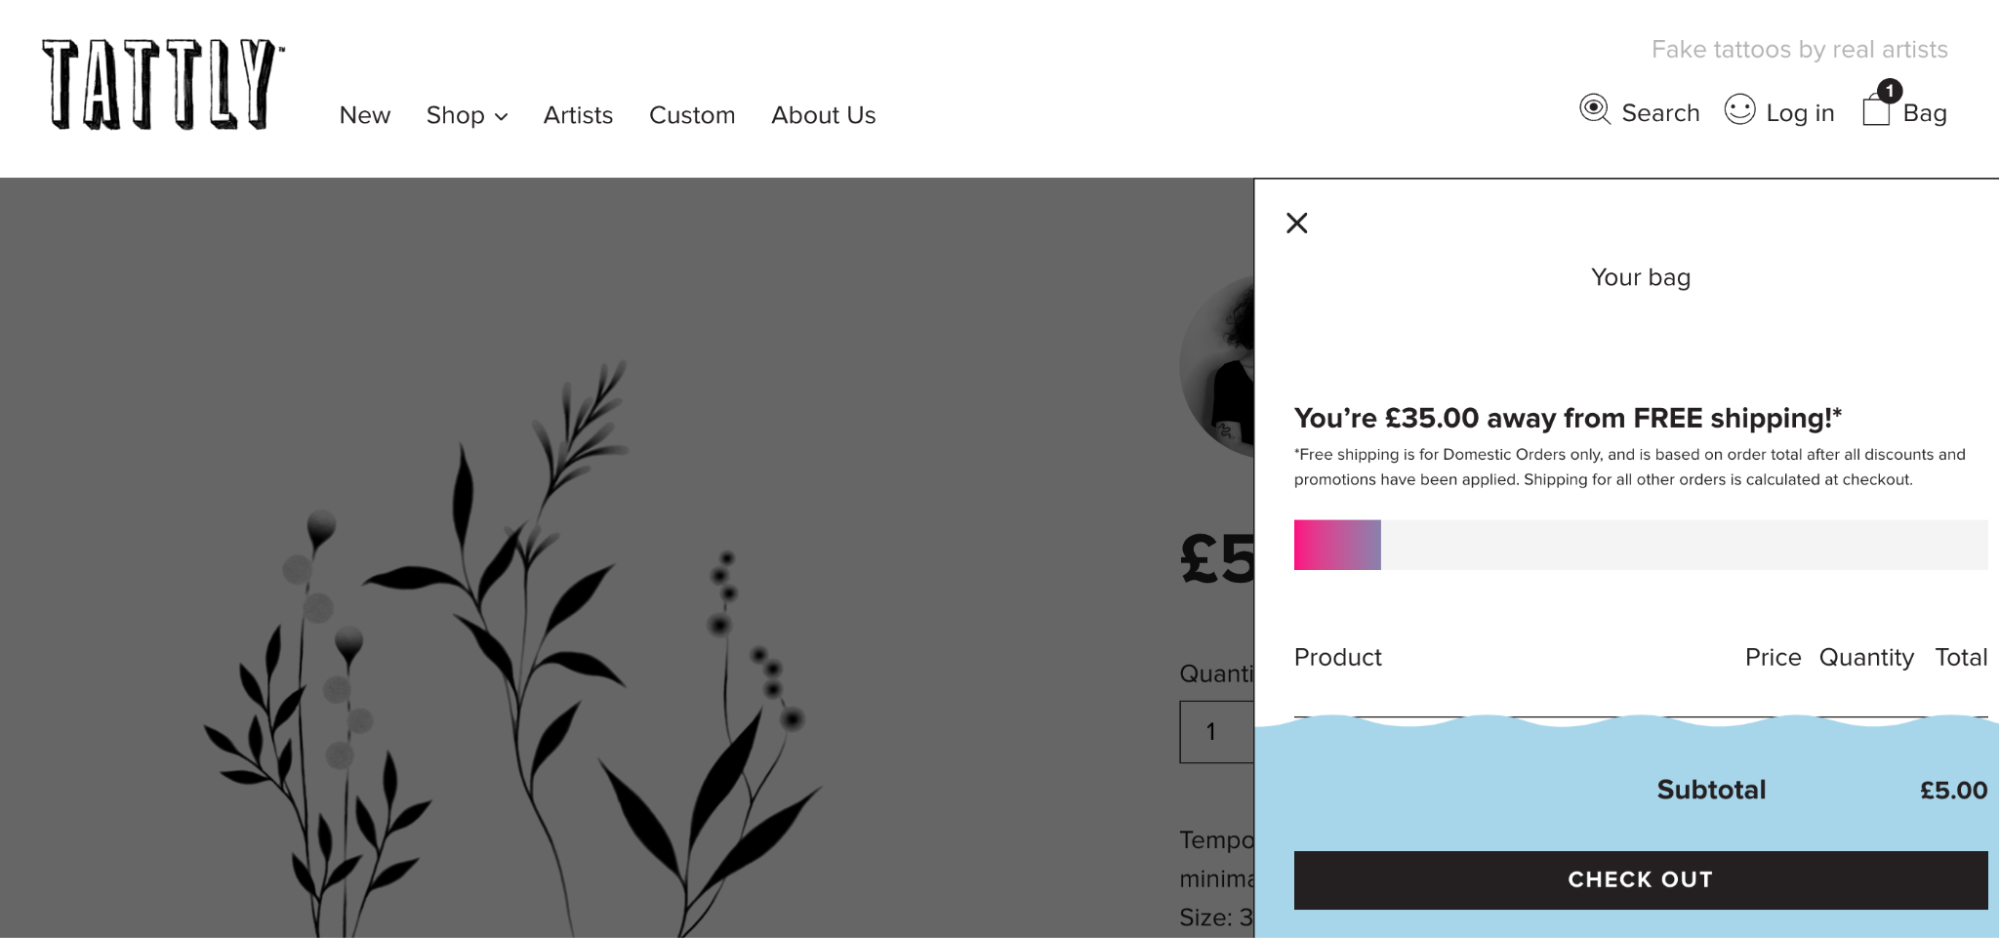 Tattly website UI that encourages people to spend £40 to qualify for free shipping.